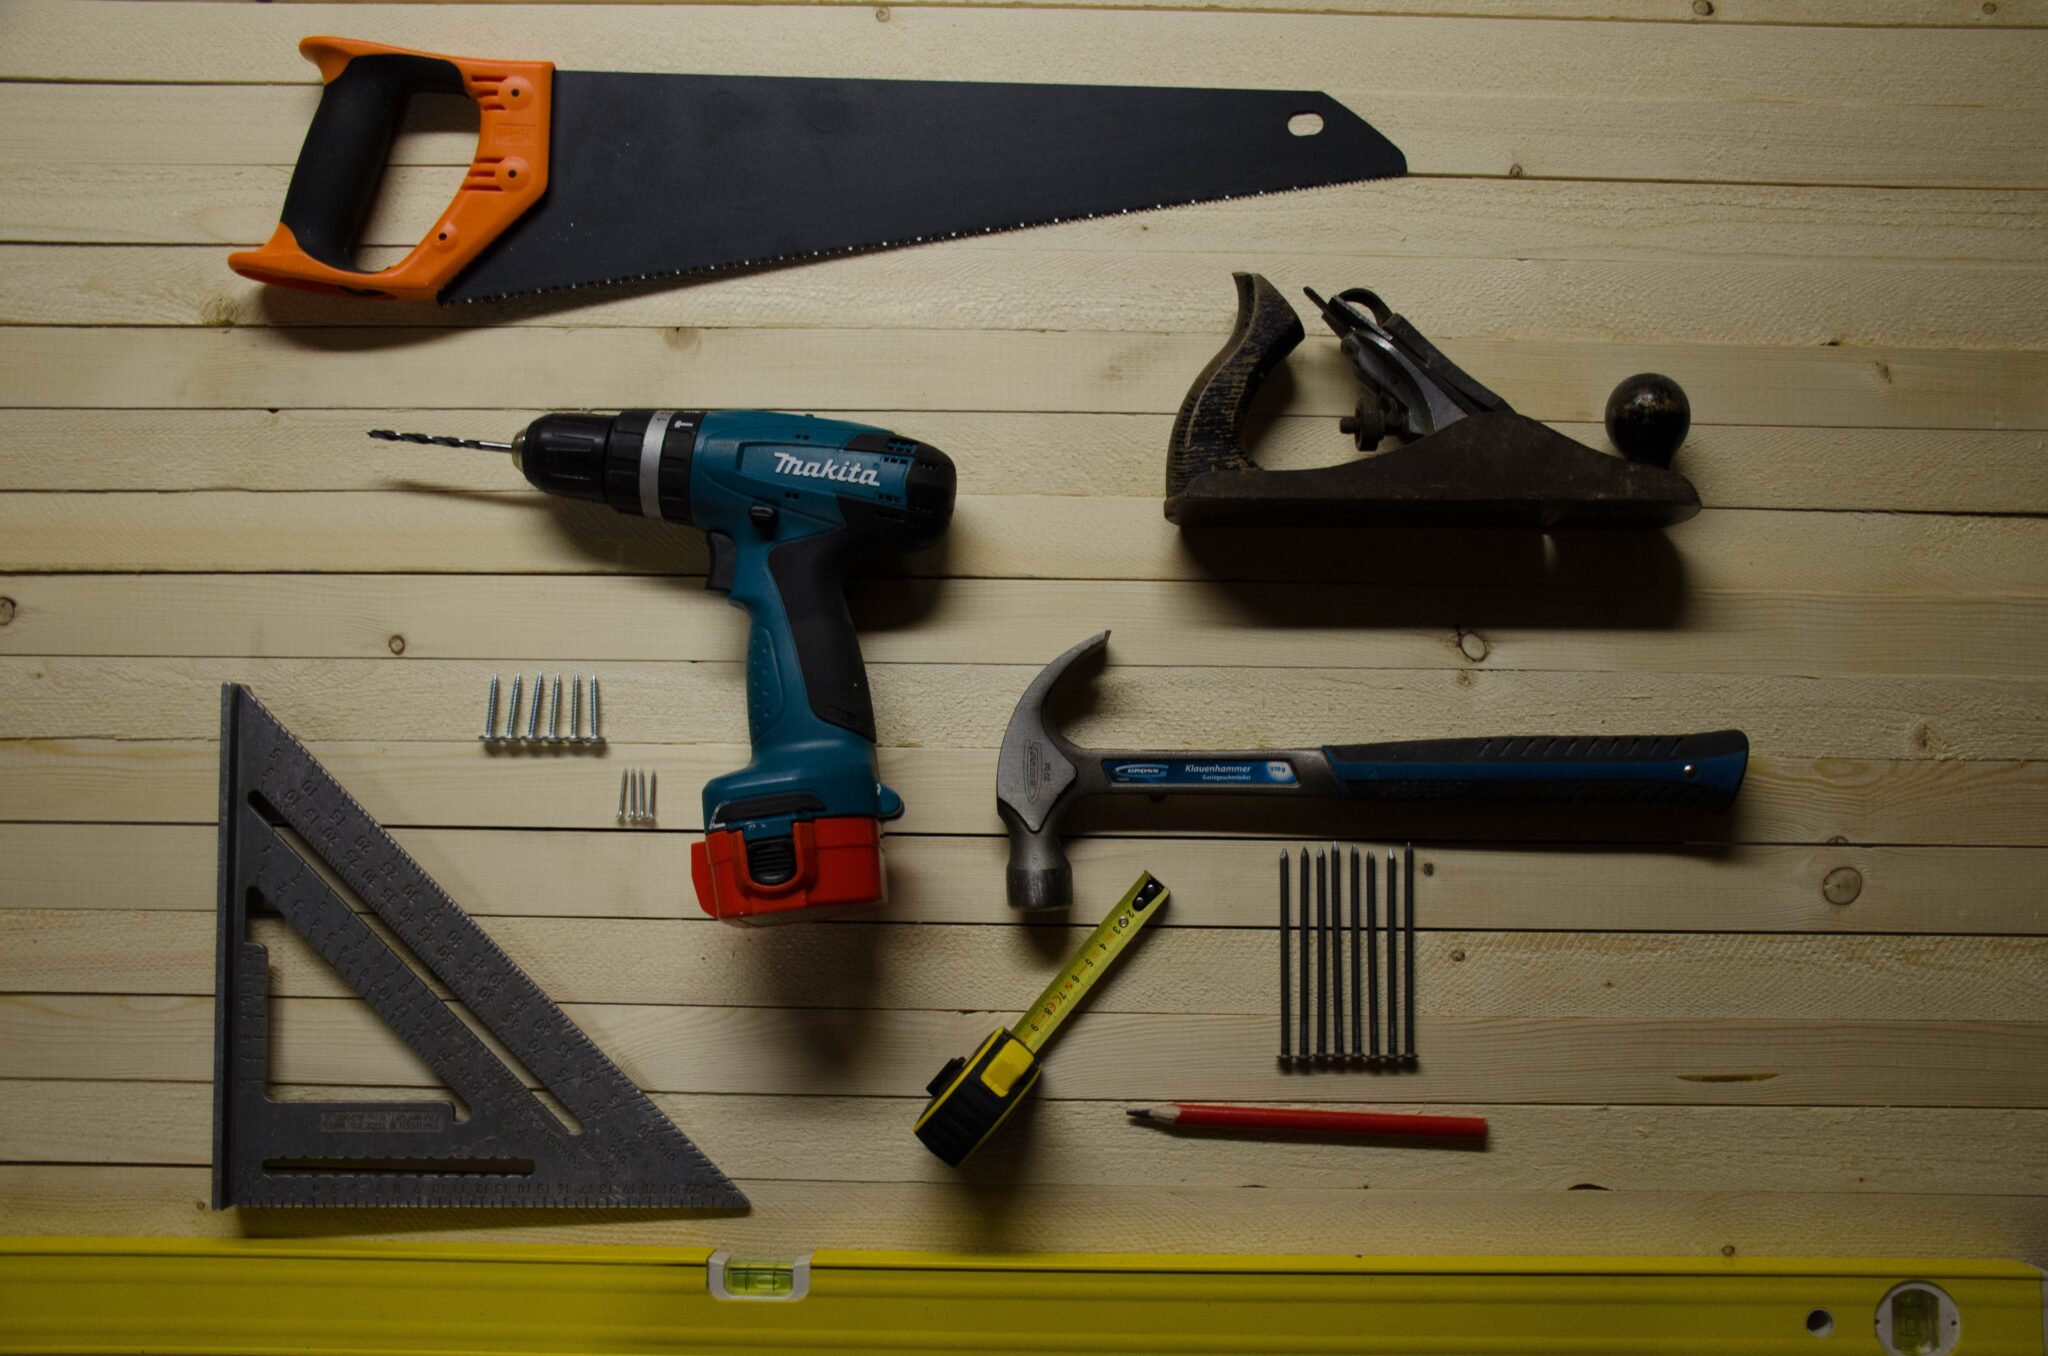 Tools laid out on wooden surface